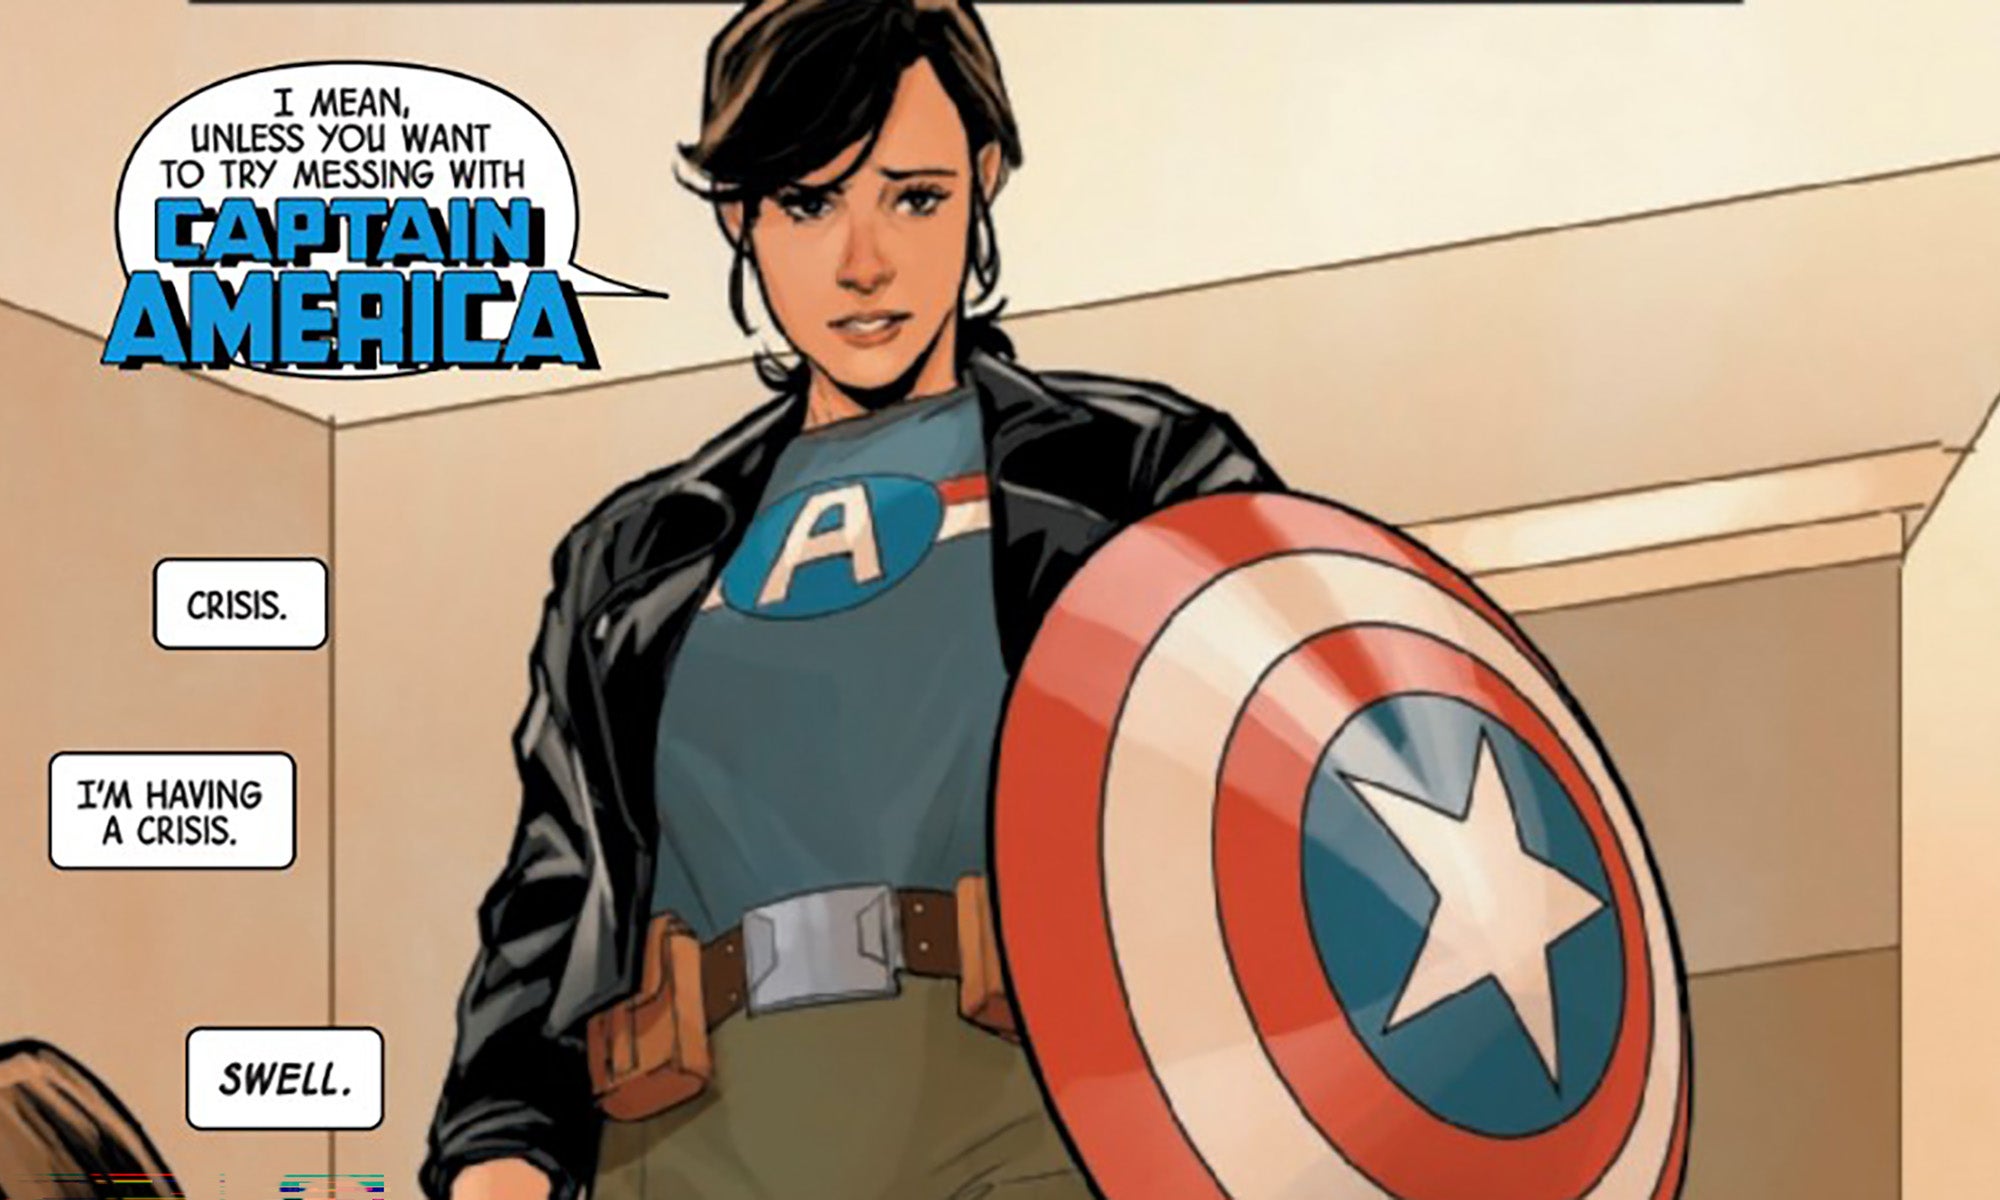 Image for Jessica Jones as Captain America: The inside story on Marvel's new Cap from The Variants #1